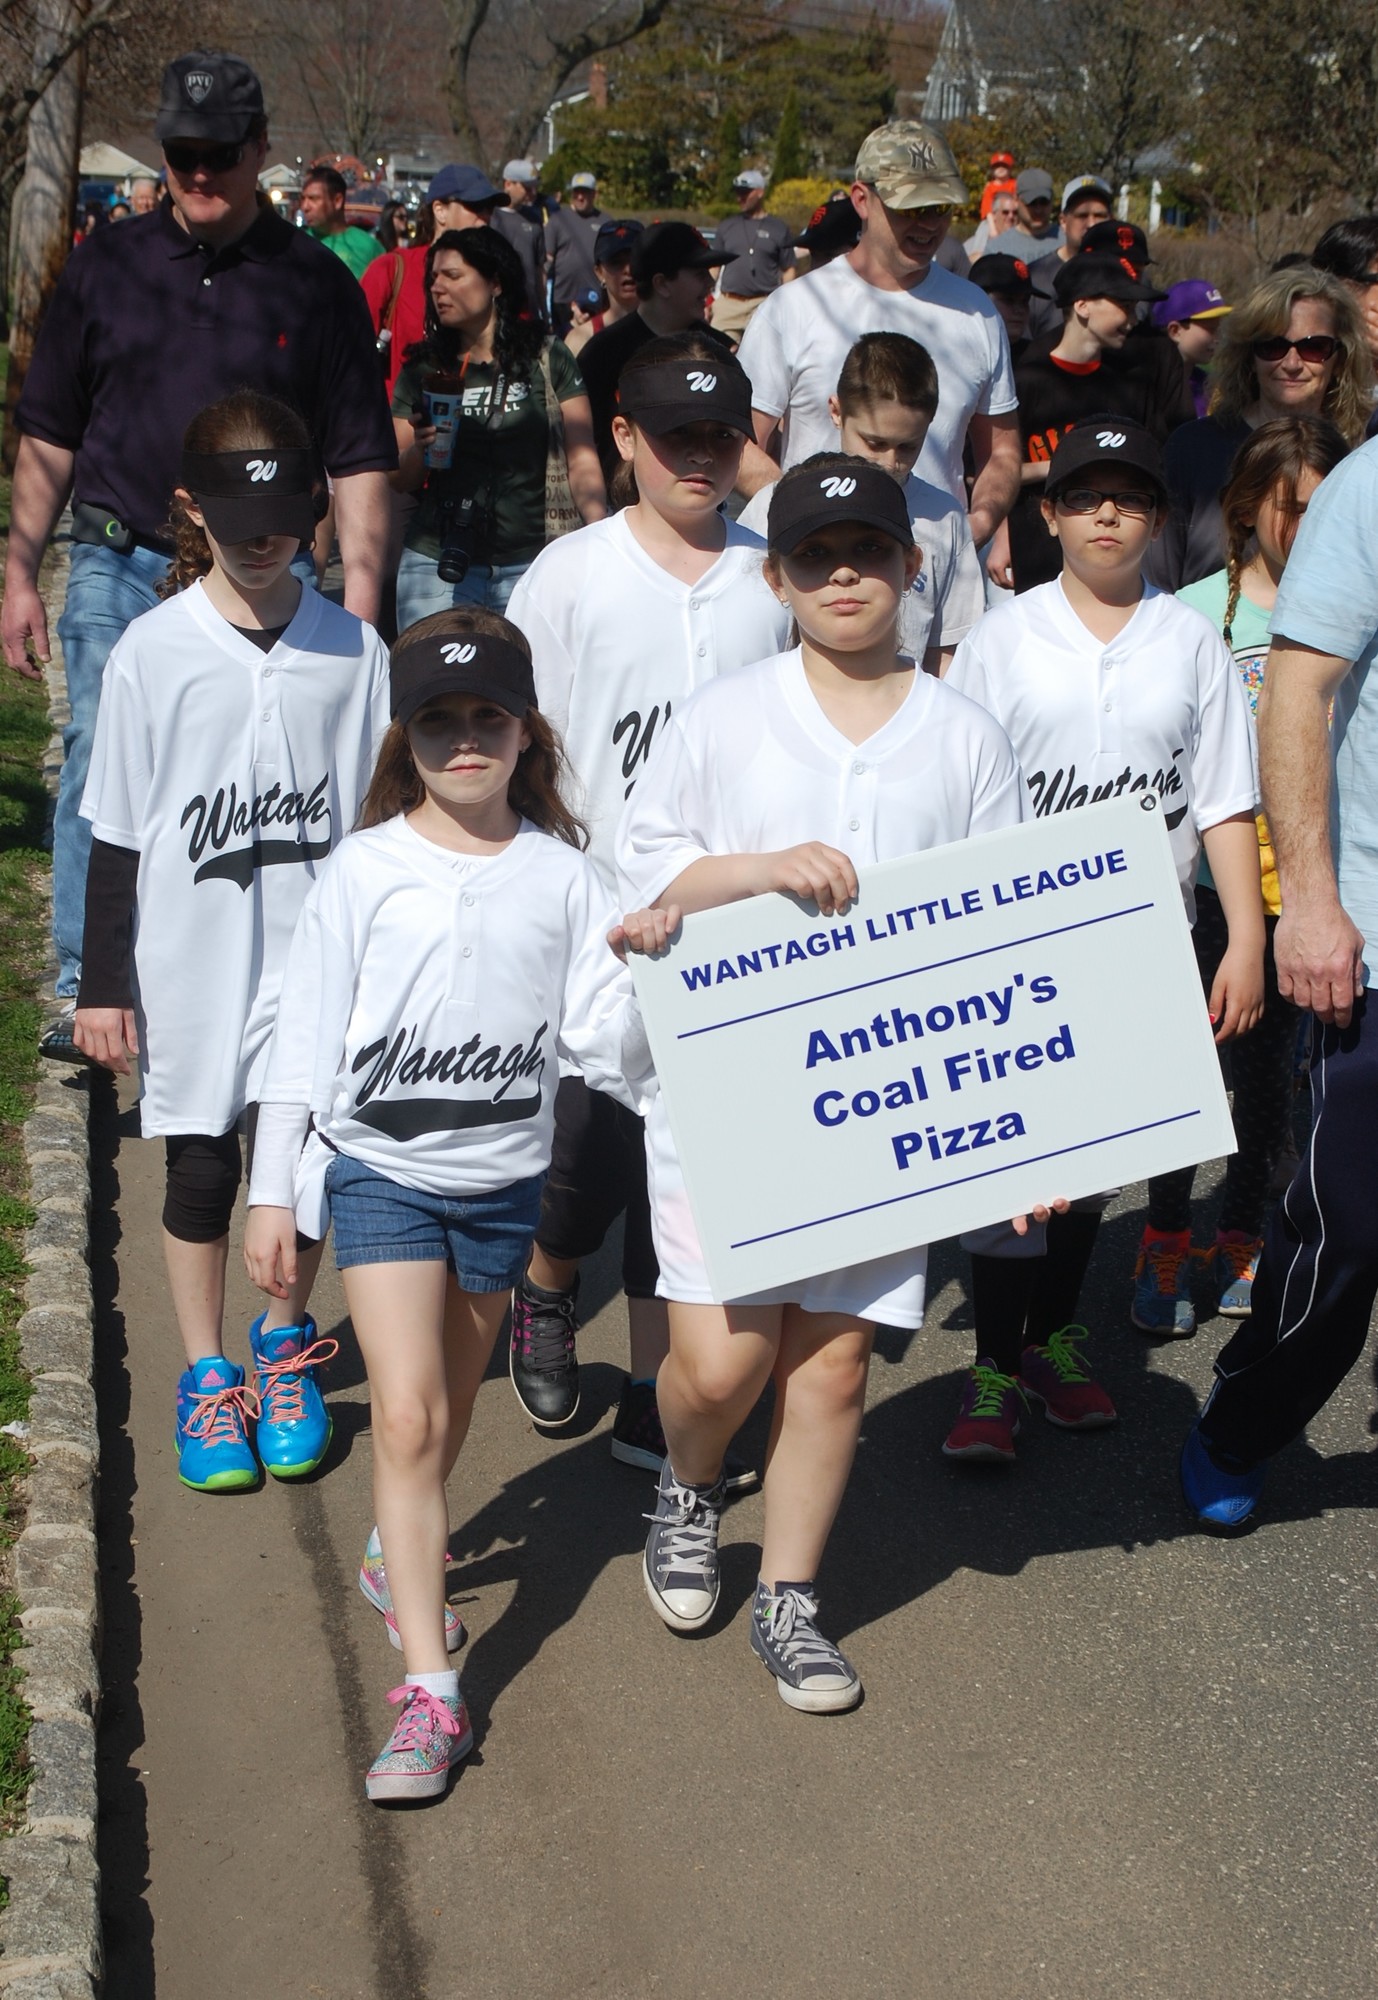 Teams marched through town for the Opening Day parade on April 18.